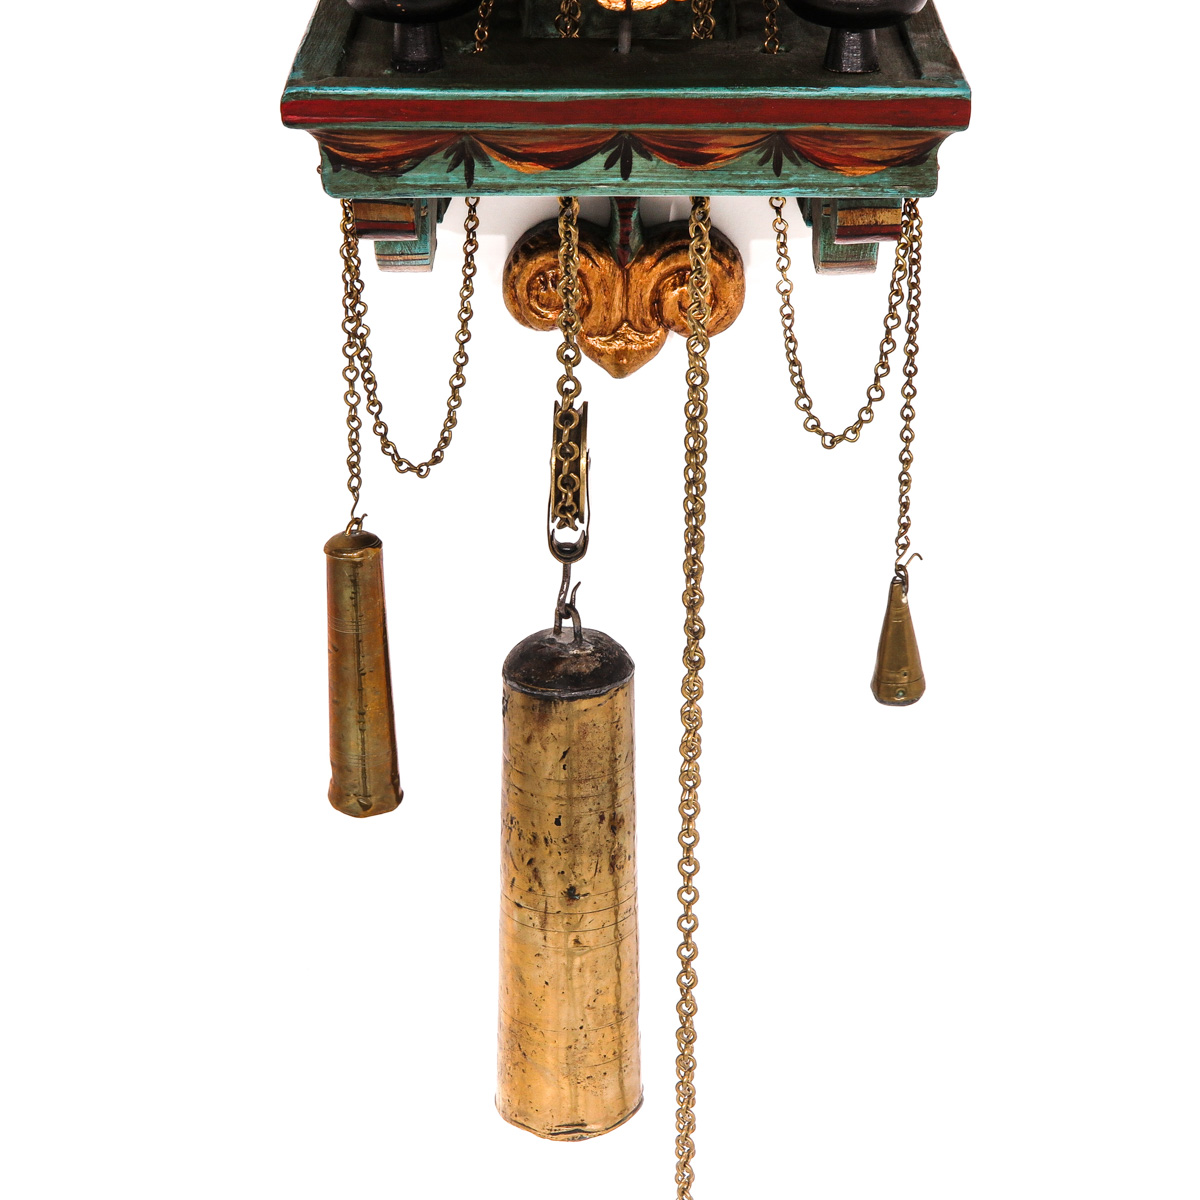 An 18th Century Hanging Clock - Image 10 of 10